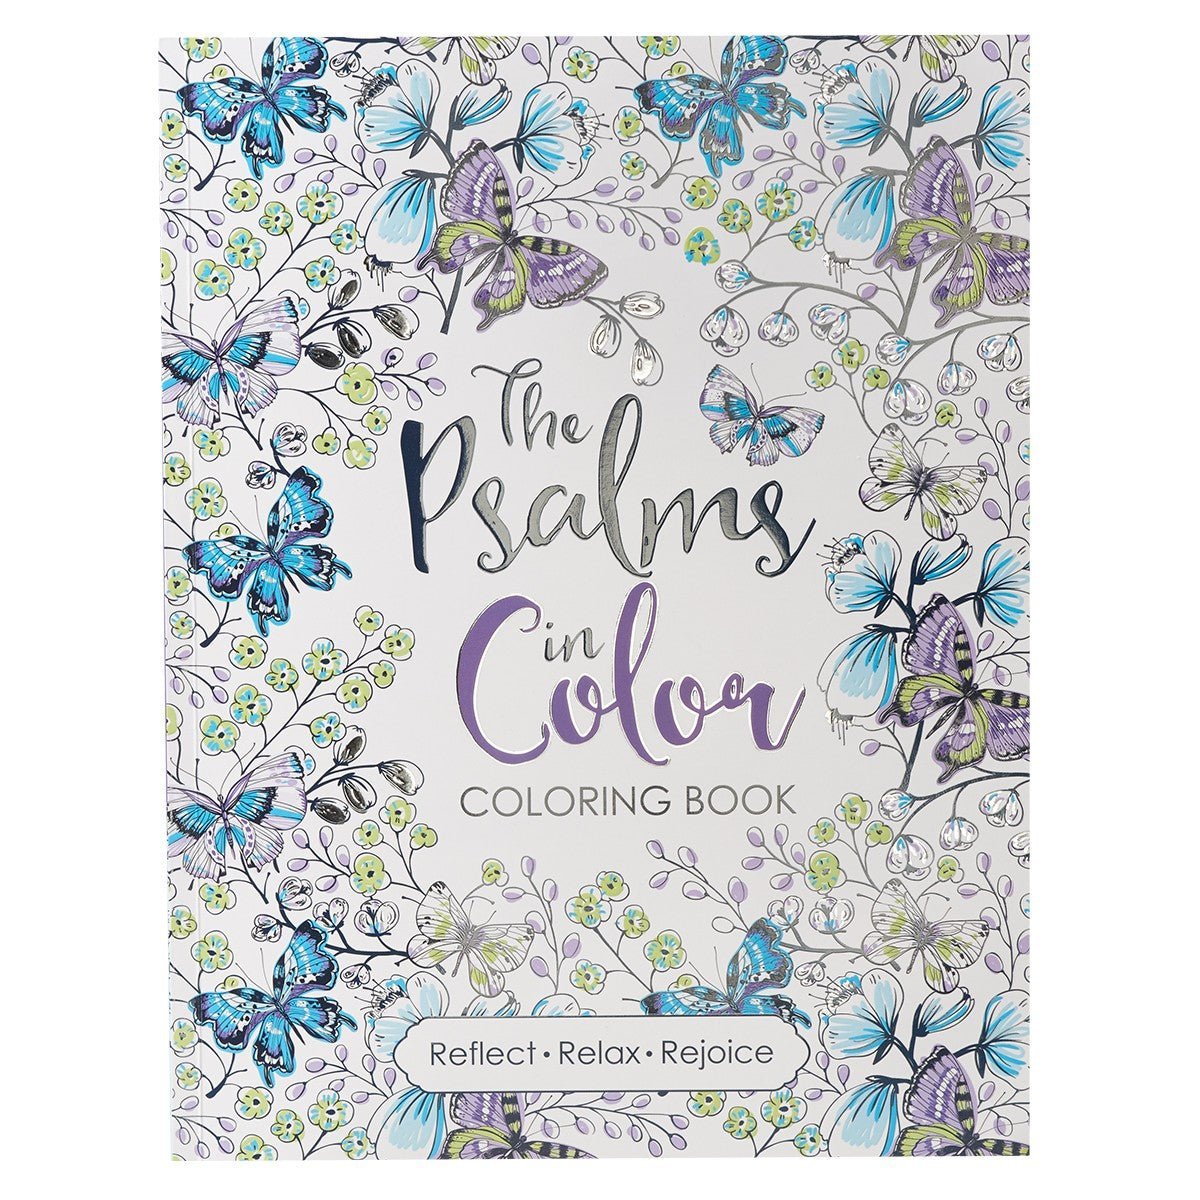 The Psalms in Color Coloring Book | 2FruitBearers